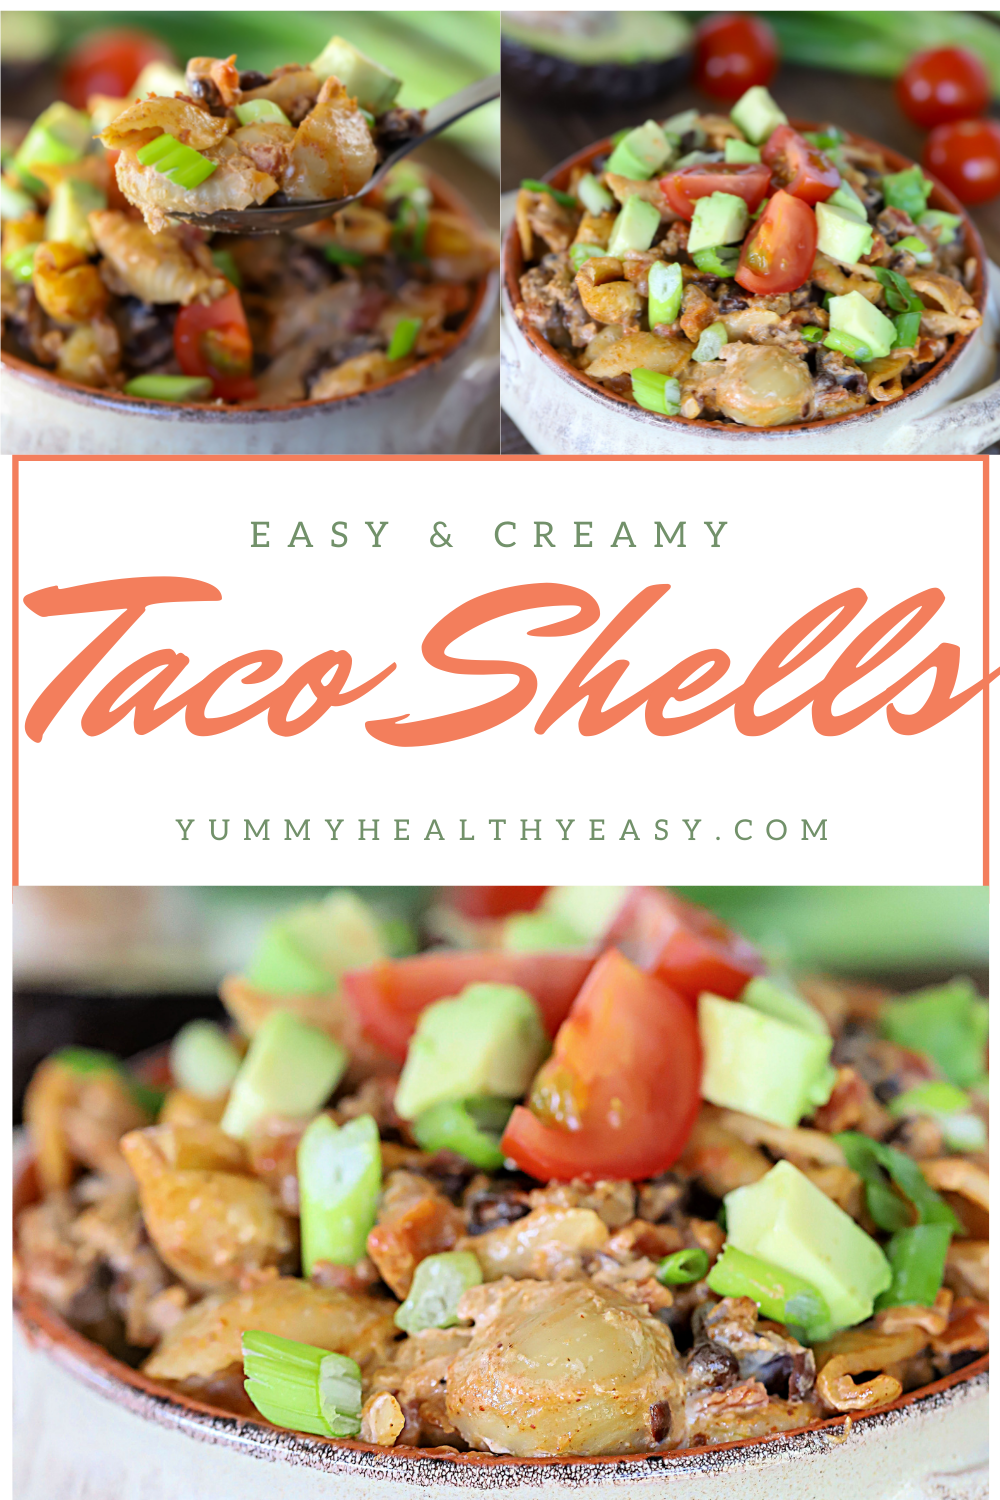 Looking for a change from your normal Taco Tuesday? Check out these Creamy Taco Shells! It's a quick 30-minute meal cooked all in one pan -ground turkey, black beans, taco seasoning and whole-wheat shells combined to make a hearty, healthy, delicious weeknight dinner! via @jennikolaus